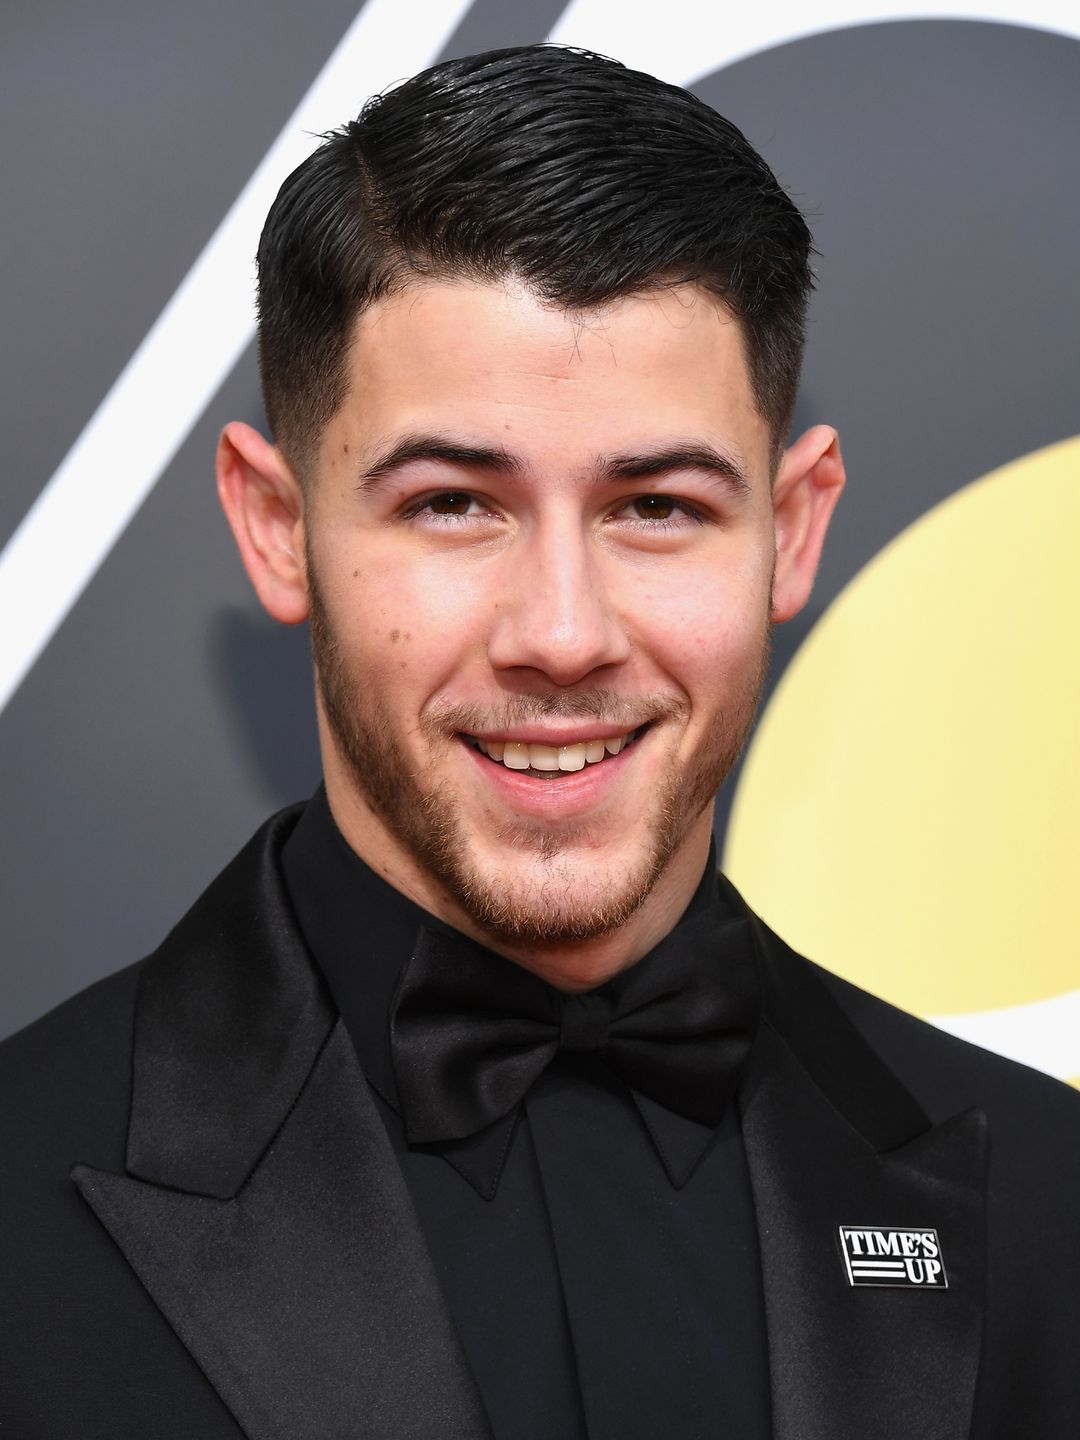 Nick Jonas who are his parents